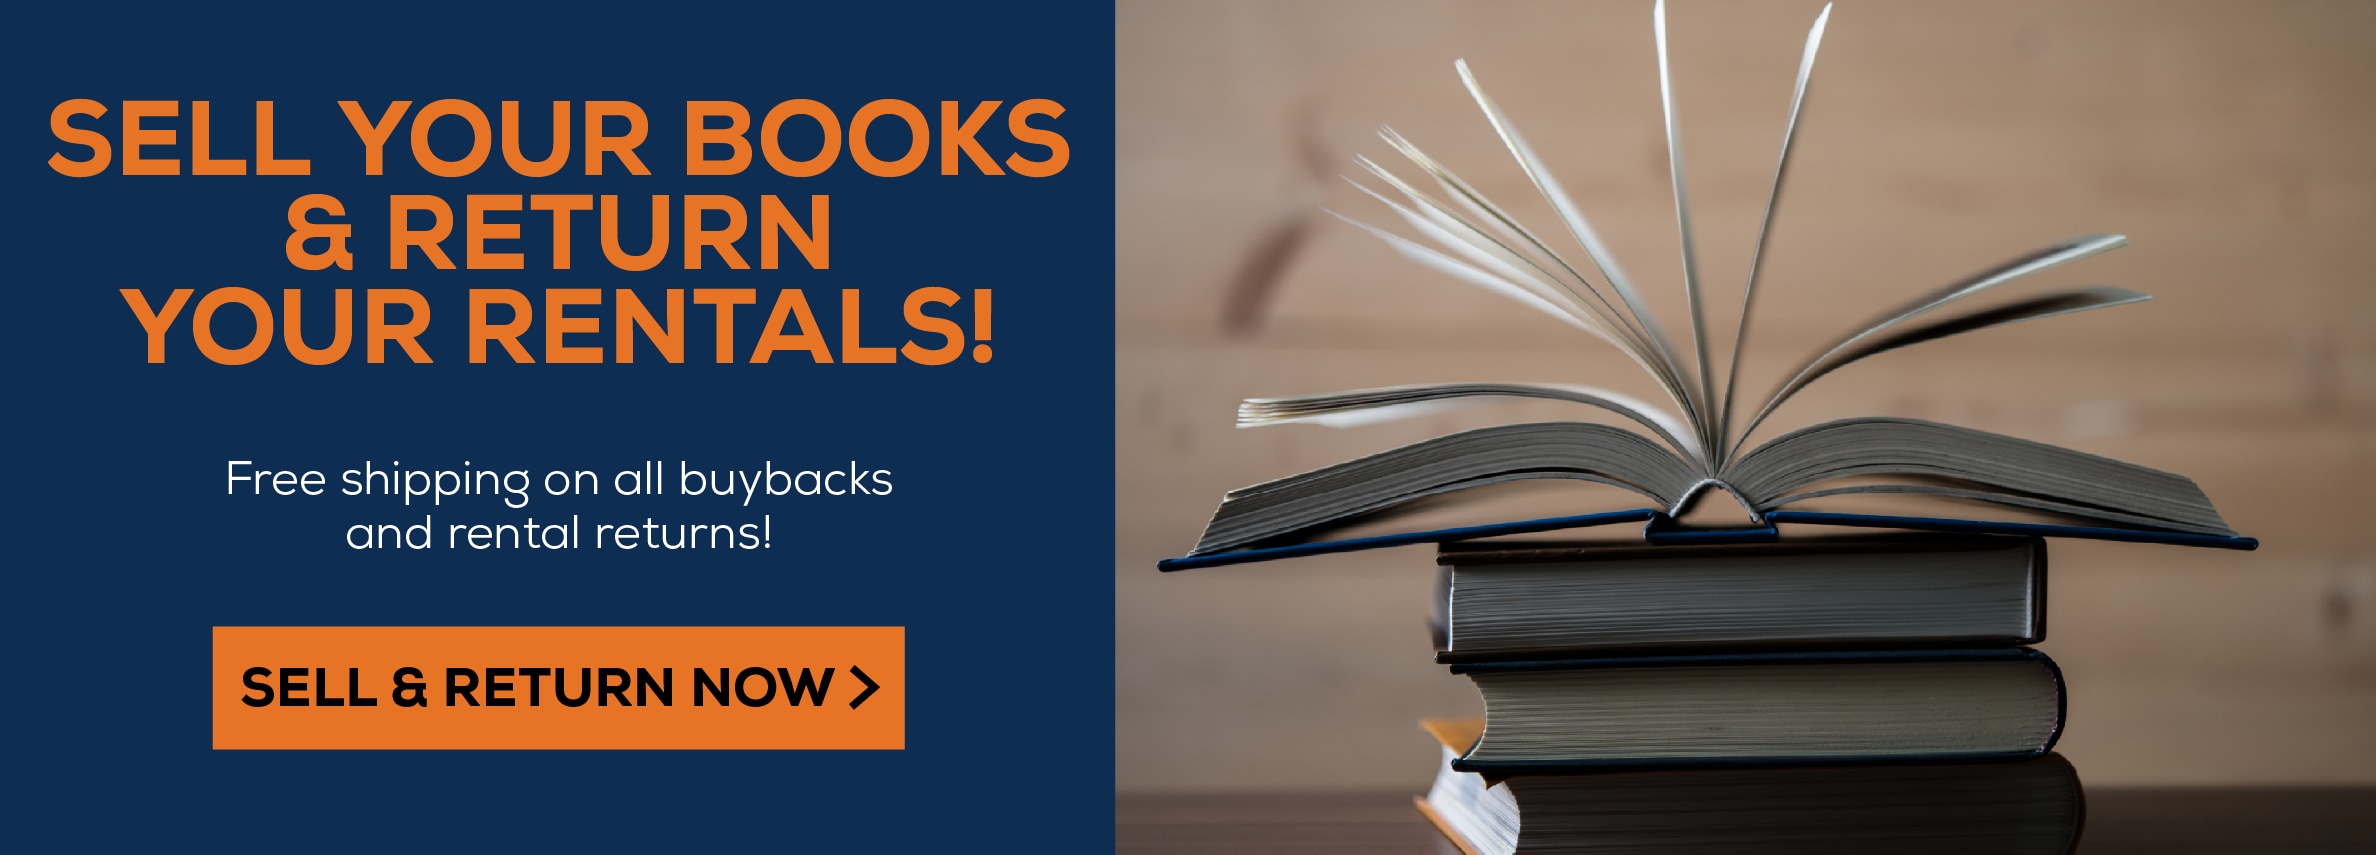 Sell your books and retrun your rentals! Free shipping on all buybacks and rental returns. sell and retrun now